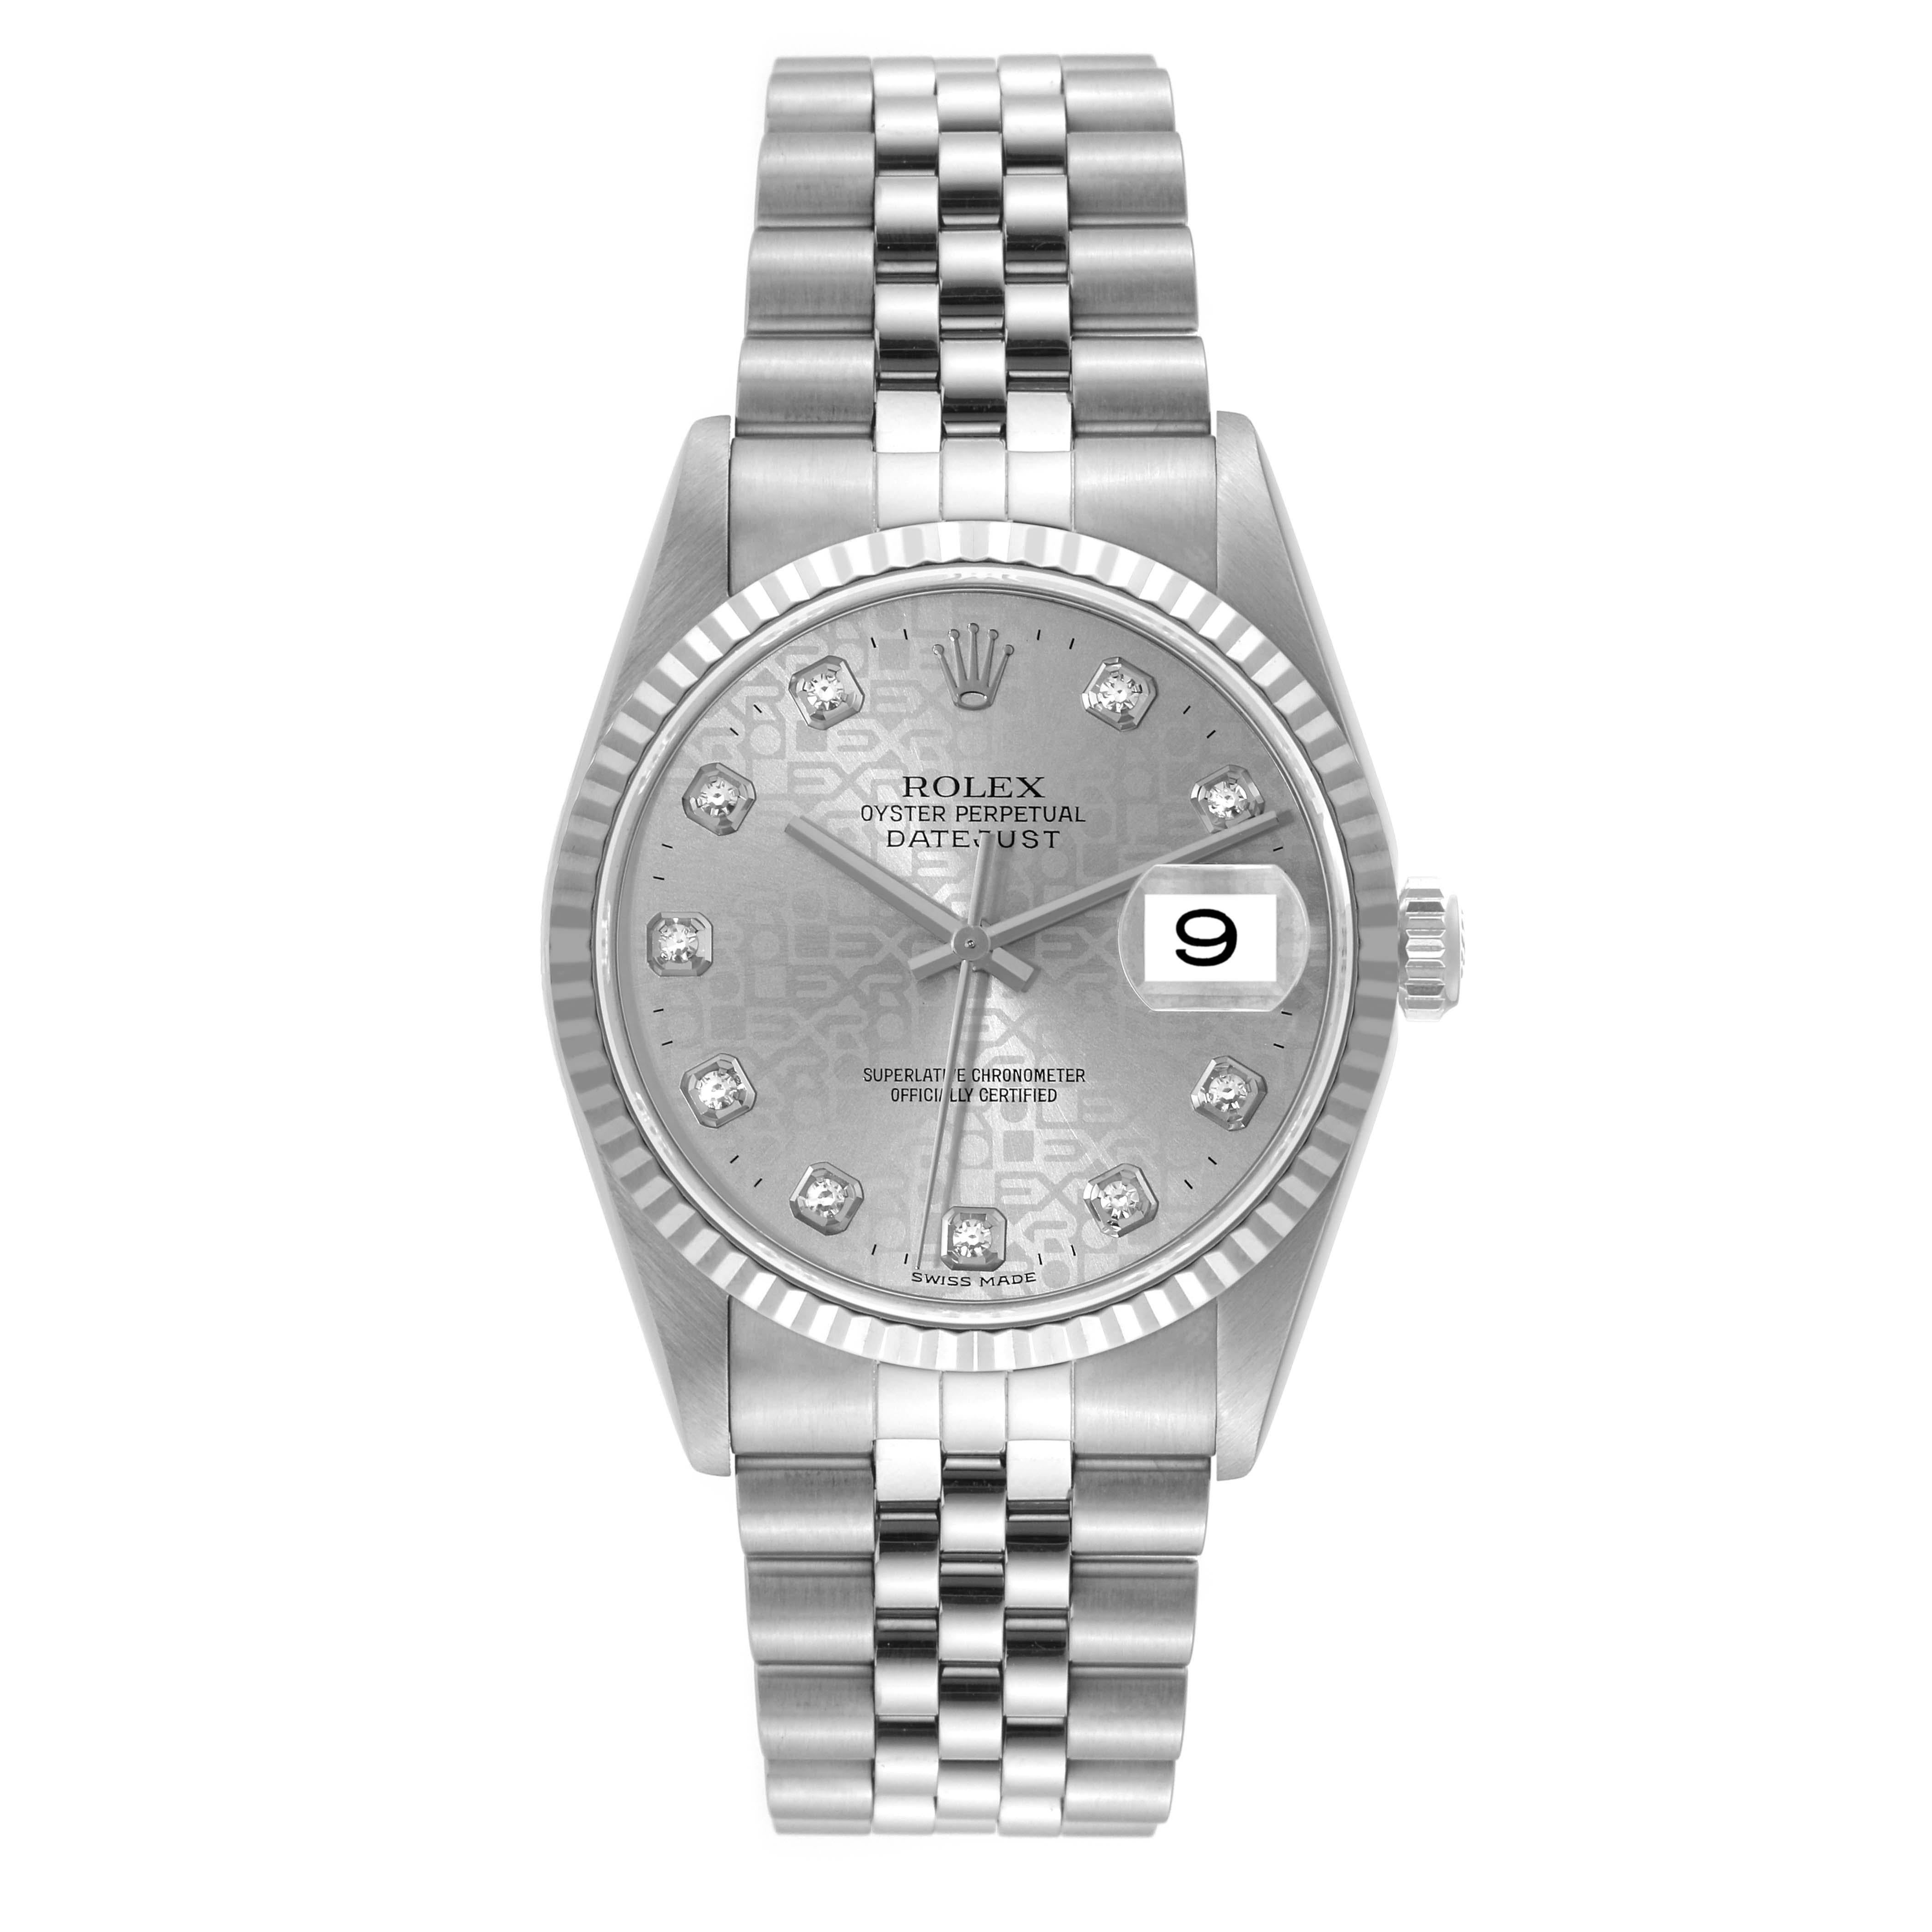 Rolex Datejust Steel White Gold Anniversary Diamond Dial Mens Watch 16234 In Excellent Condition For Sale In Atlanta, GA